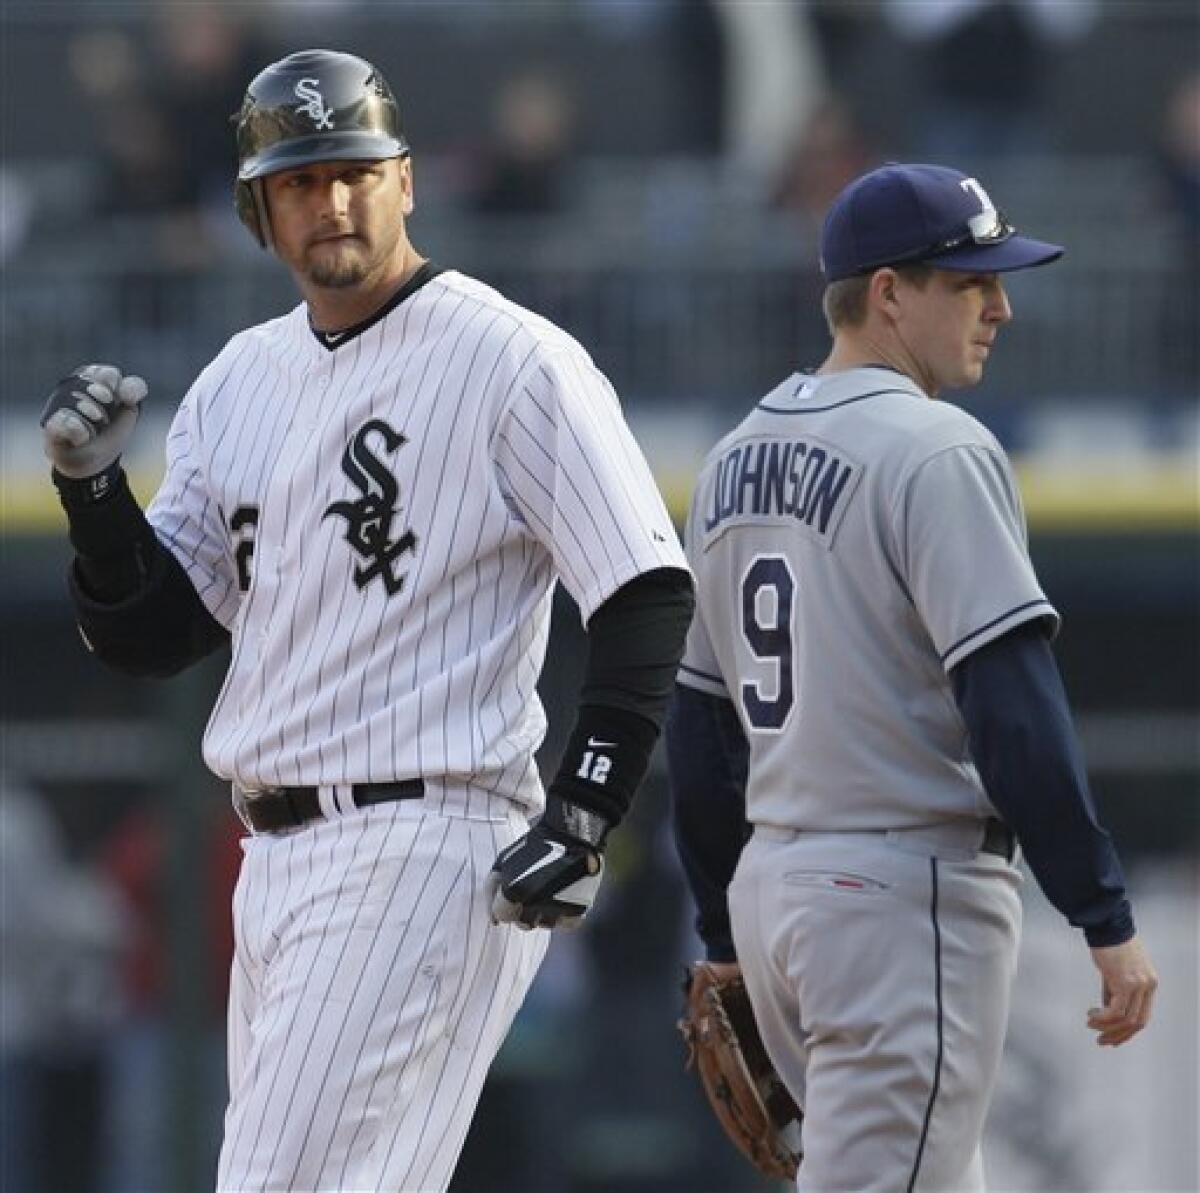 Beckham hits 3 doubles in White Sox win - The San Diego Union-Tribune